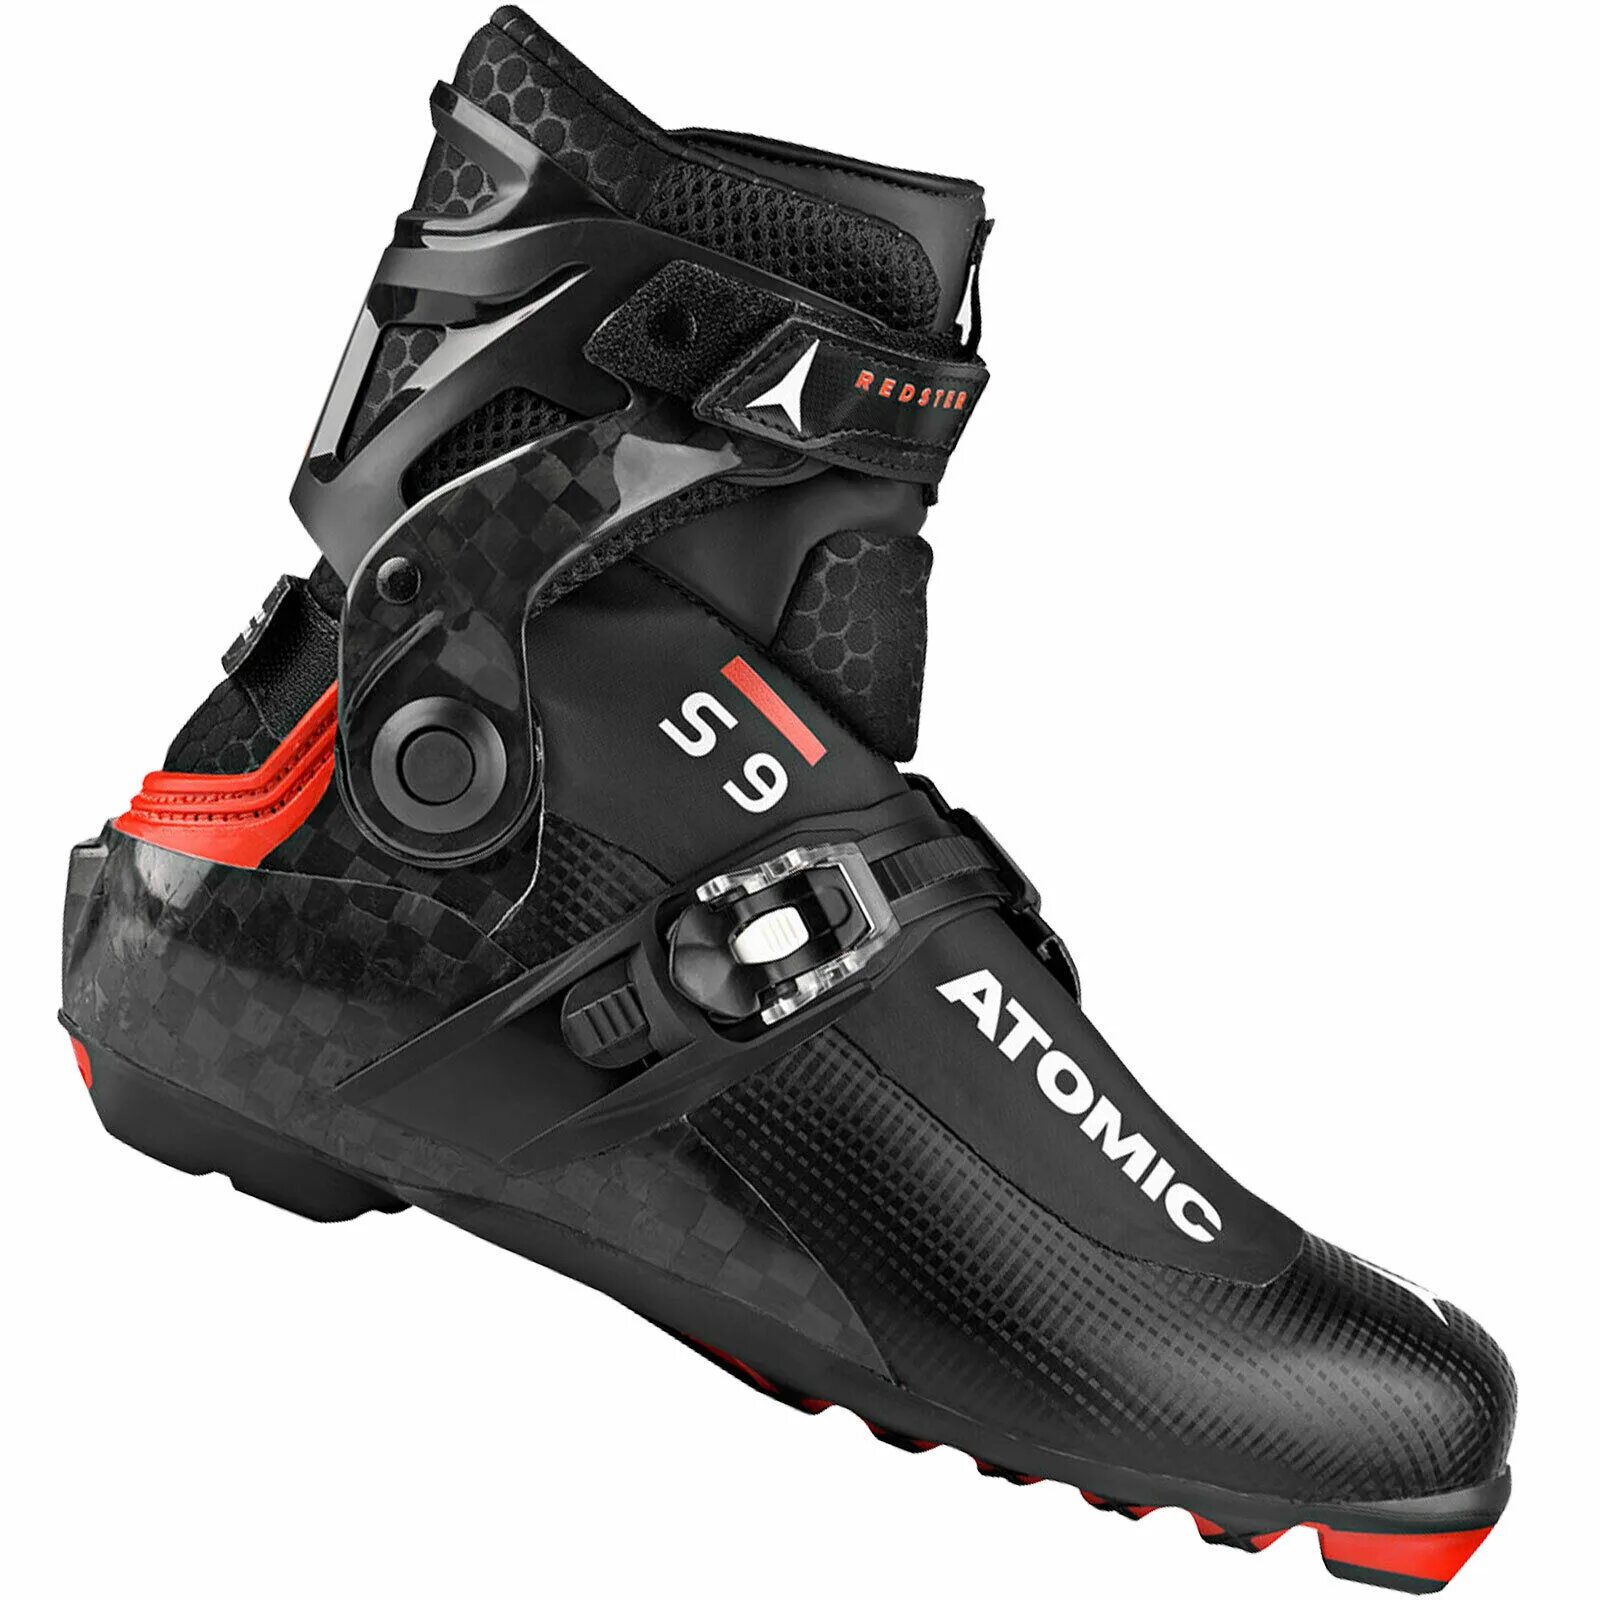 Atomic redster carbon s9. Boots Atomic Redster s9 Carbon. Atomic 2020-21 Redster c9 ботинки. Atomic Redster s9. Atomic Redster WC 130.